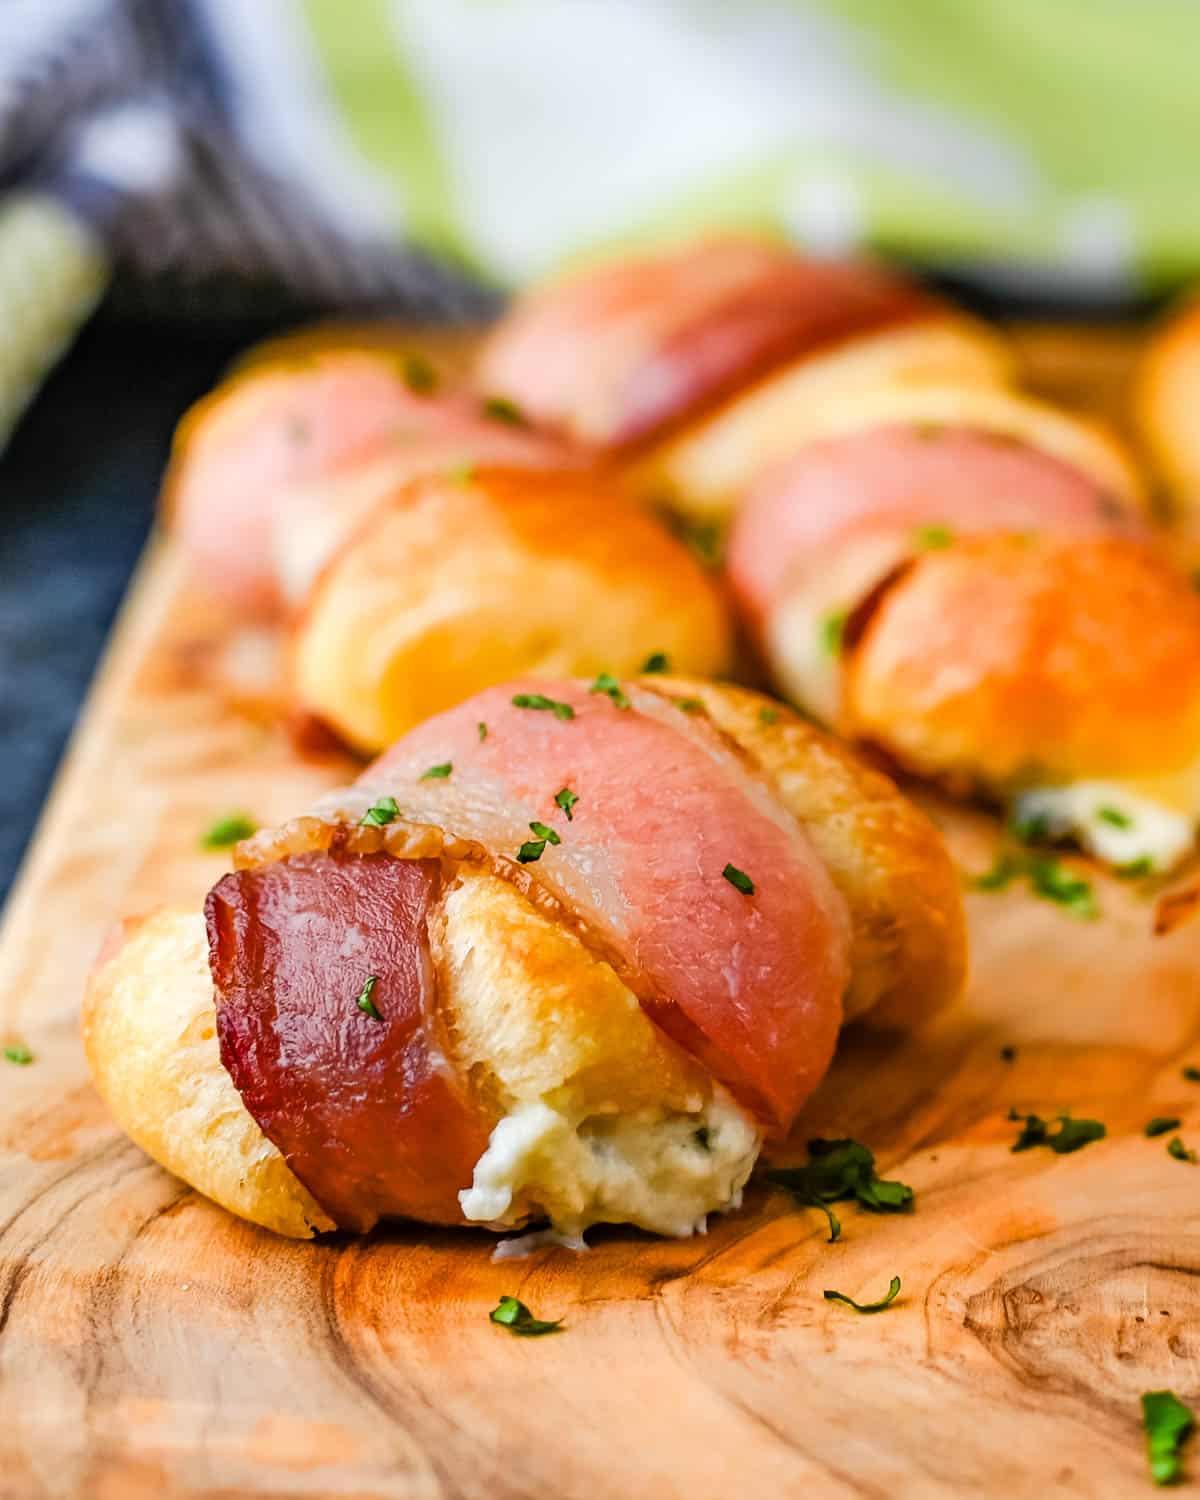 Bacon-wrapped cream cheese crescent rolls on a wooden board.